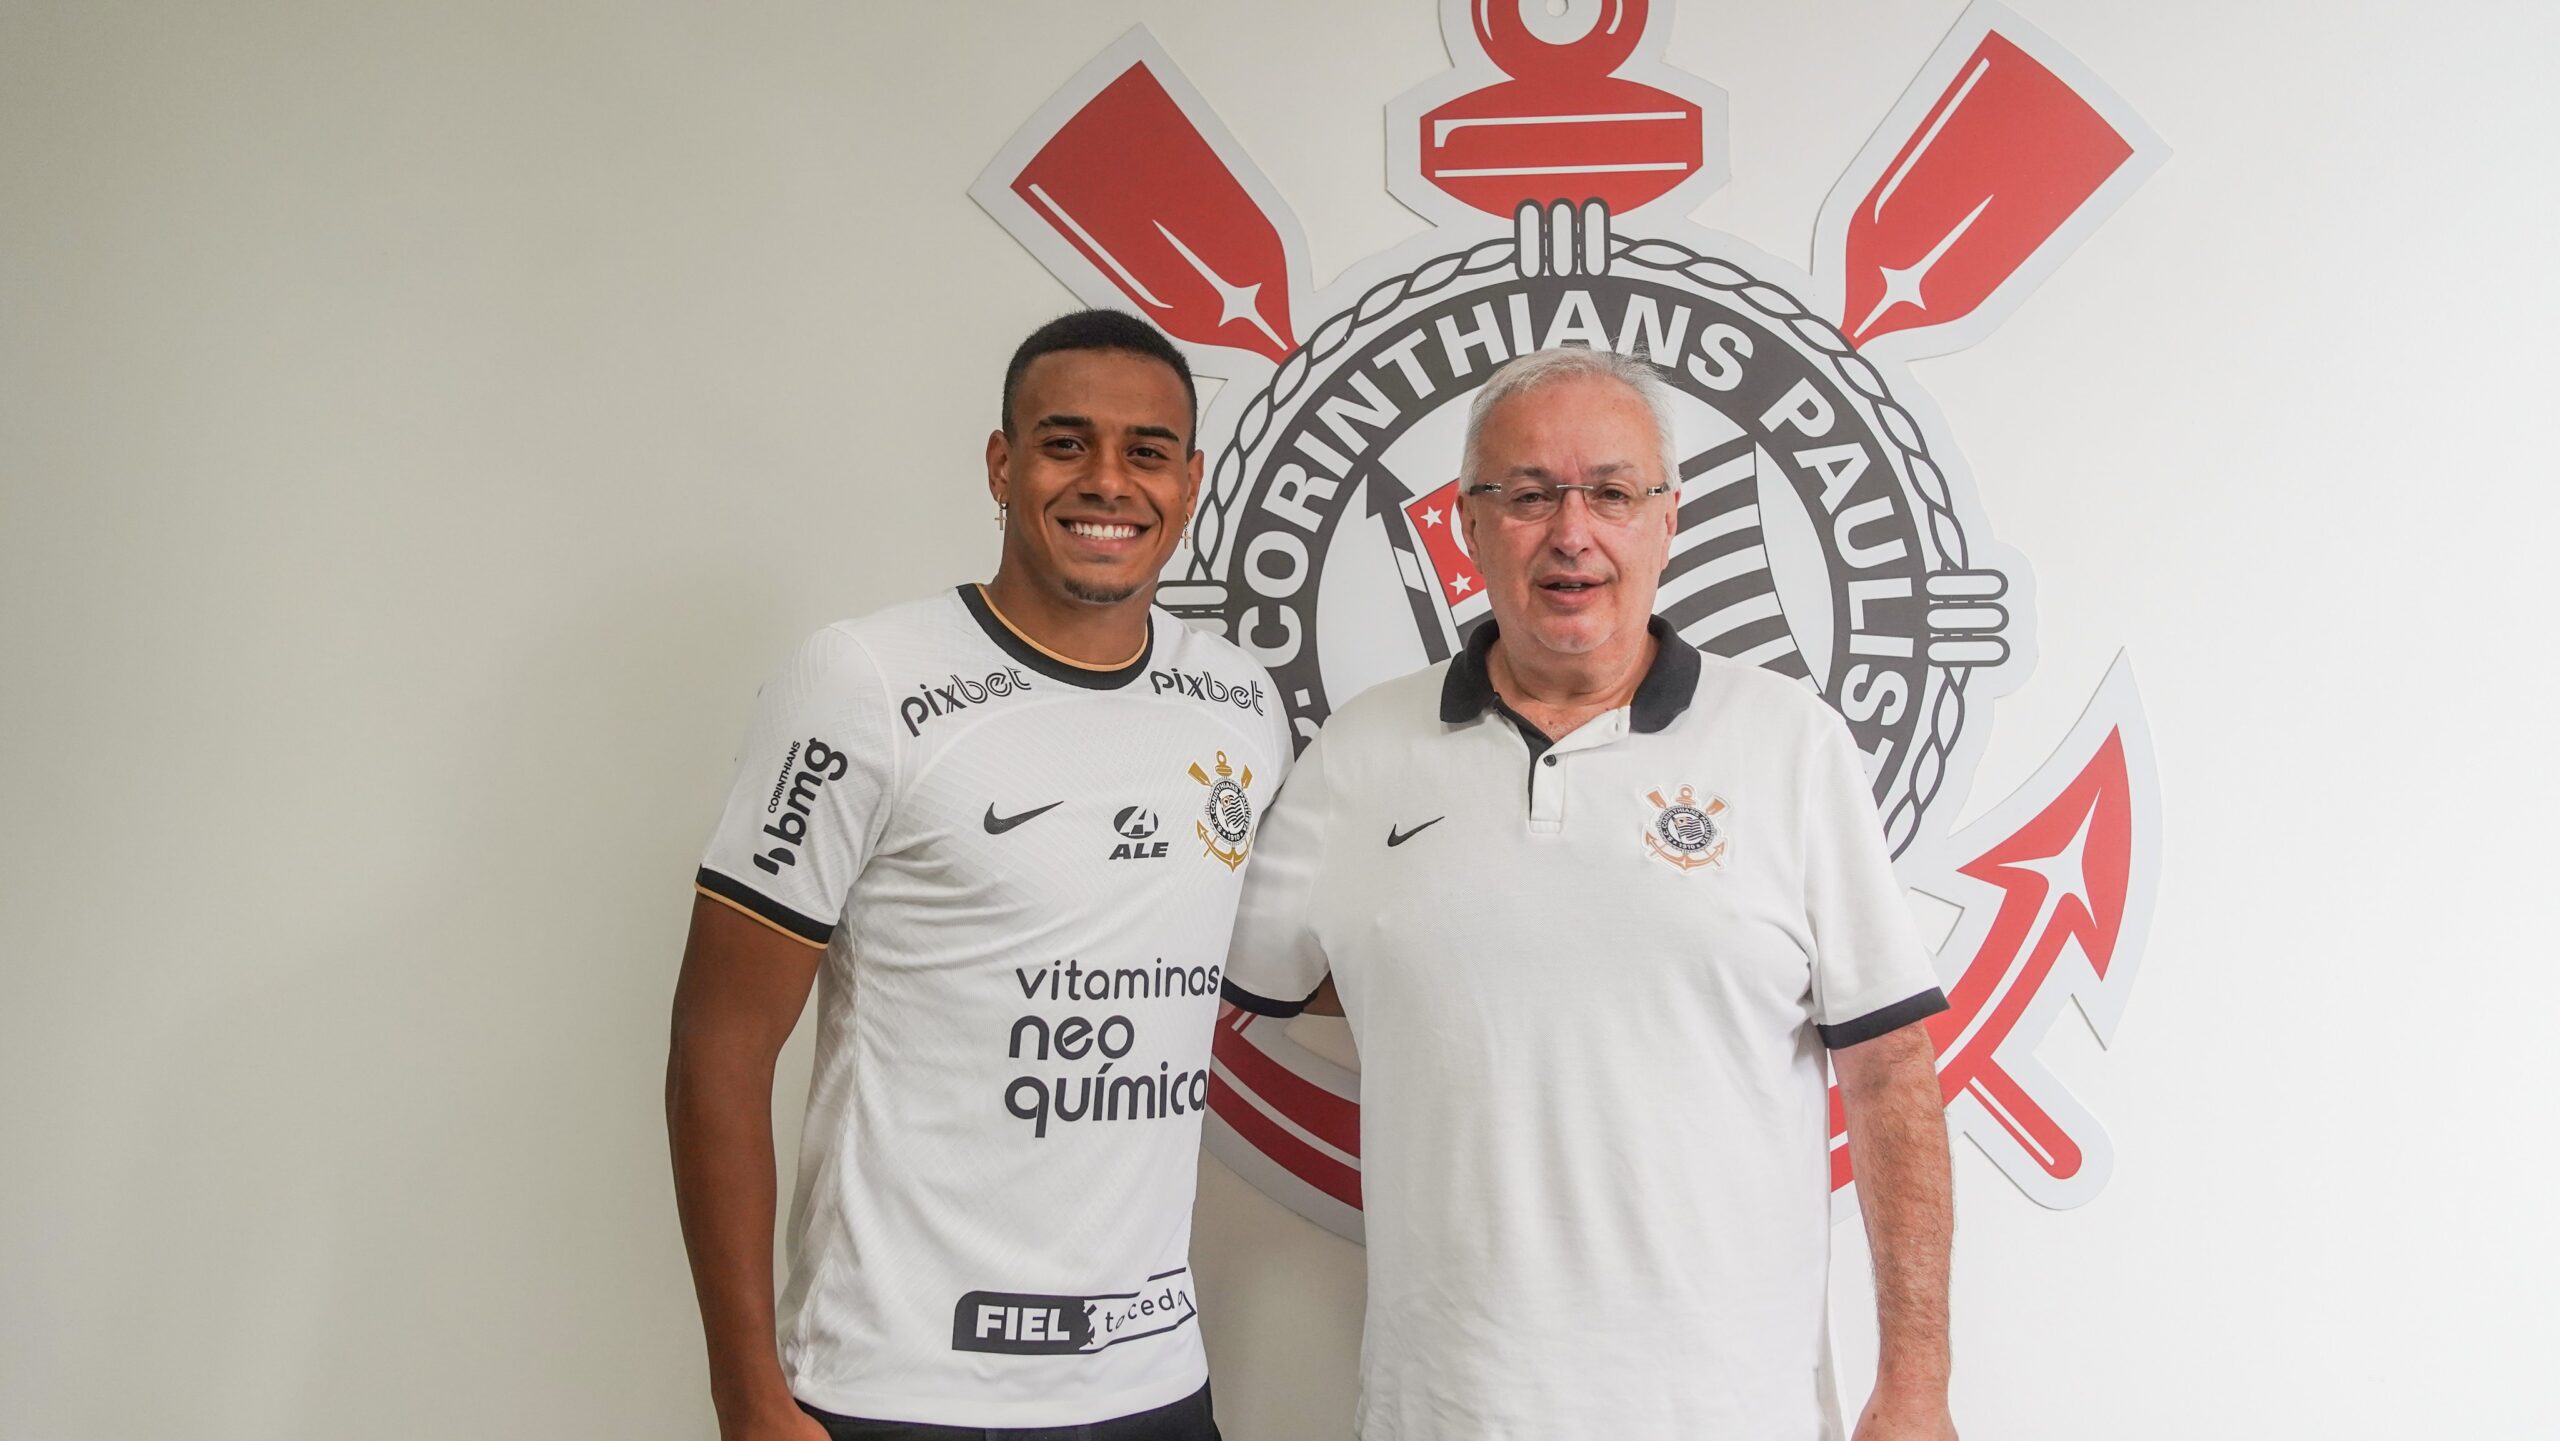 Fiorentina chased after Murillo throughout the summer, but Nottingham Forest are in the lead to acquire him from Corinthians.